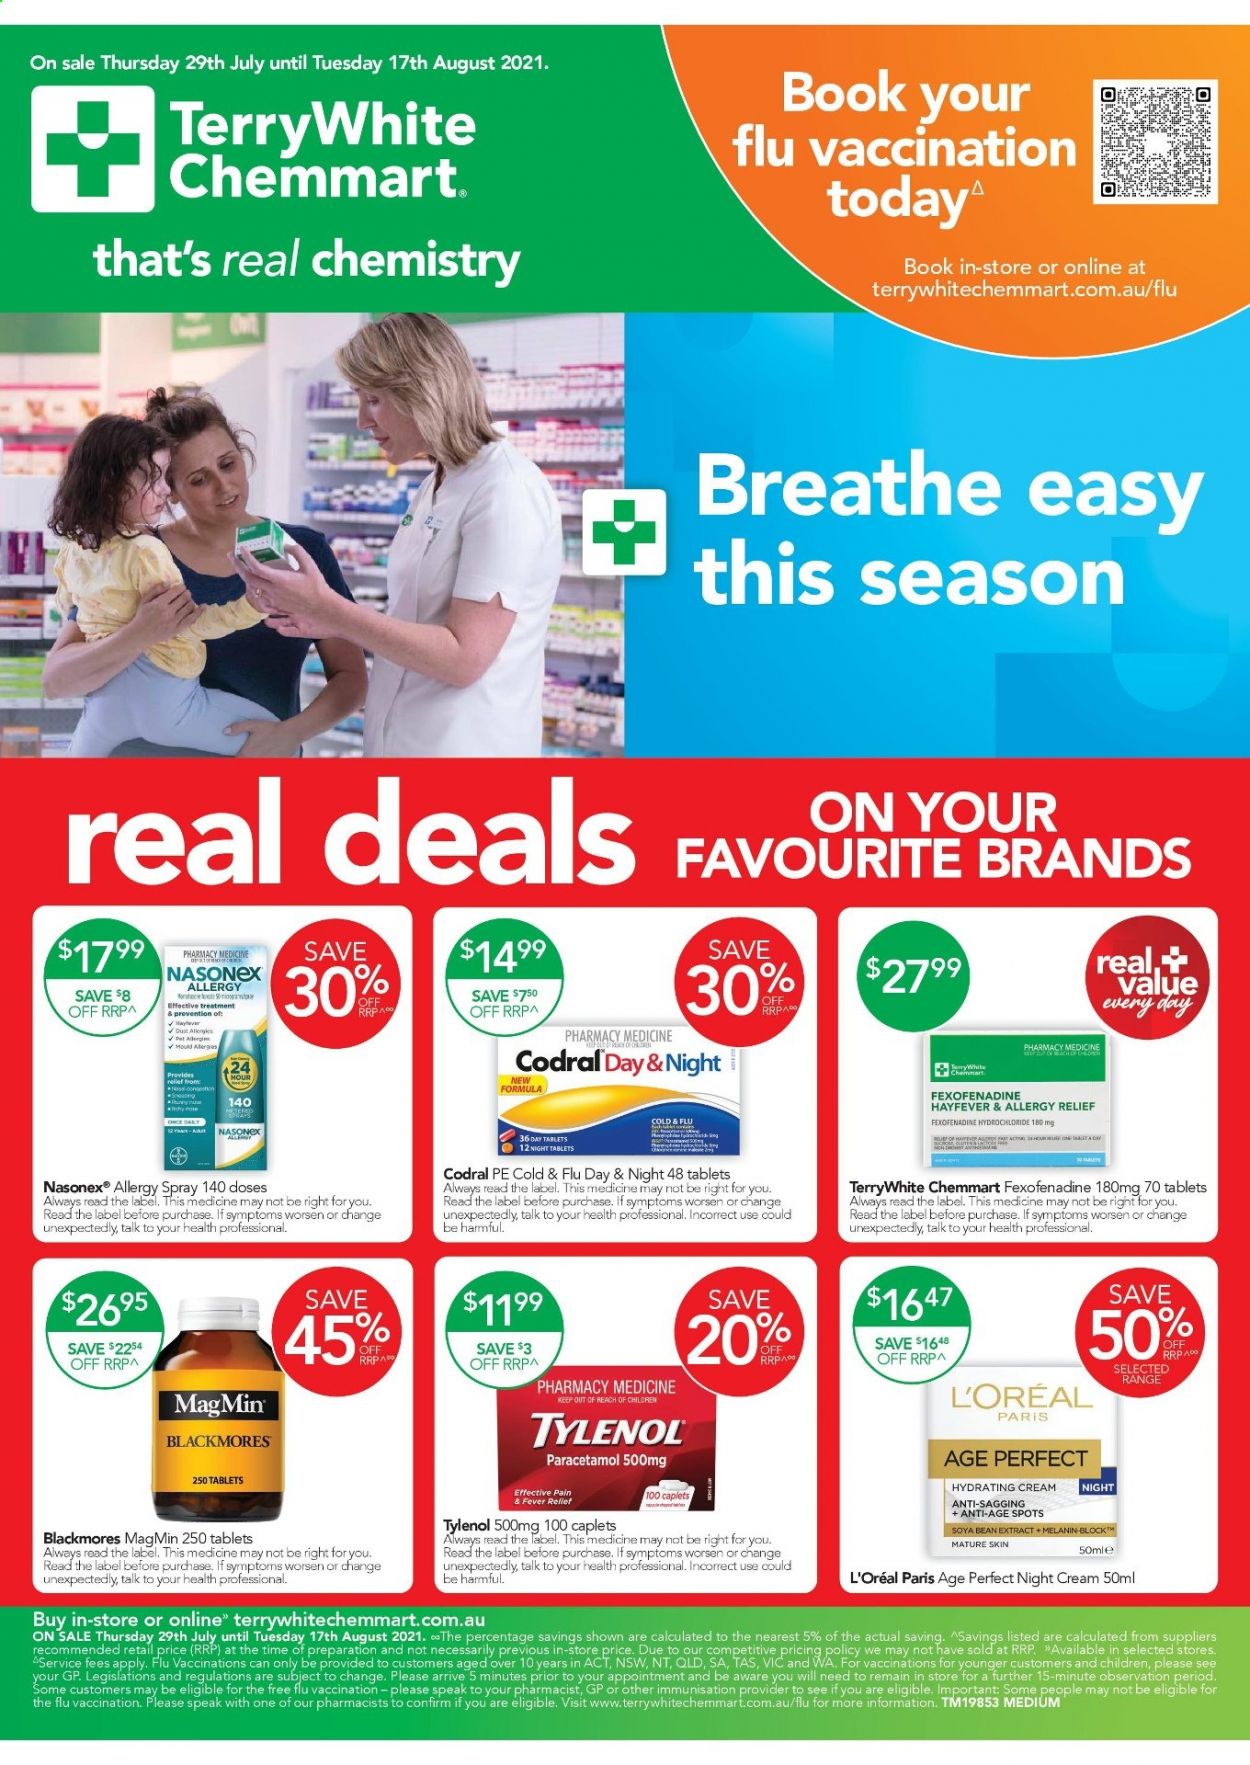 TerryWhite Chemmart Catalogue - 29 Jul 2021 - 17 Aug 2021 - Sales products - Nana, L’Oréal, night cream, Cold & Flu, Tylenol, Blackmores, Allergy Relief, Codral. Page 1.